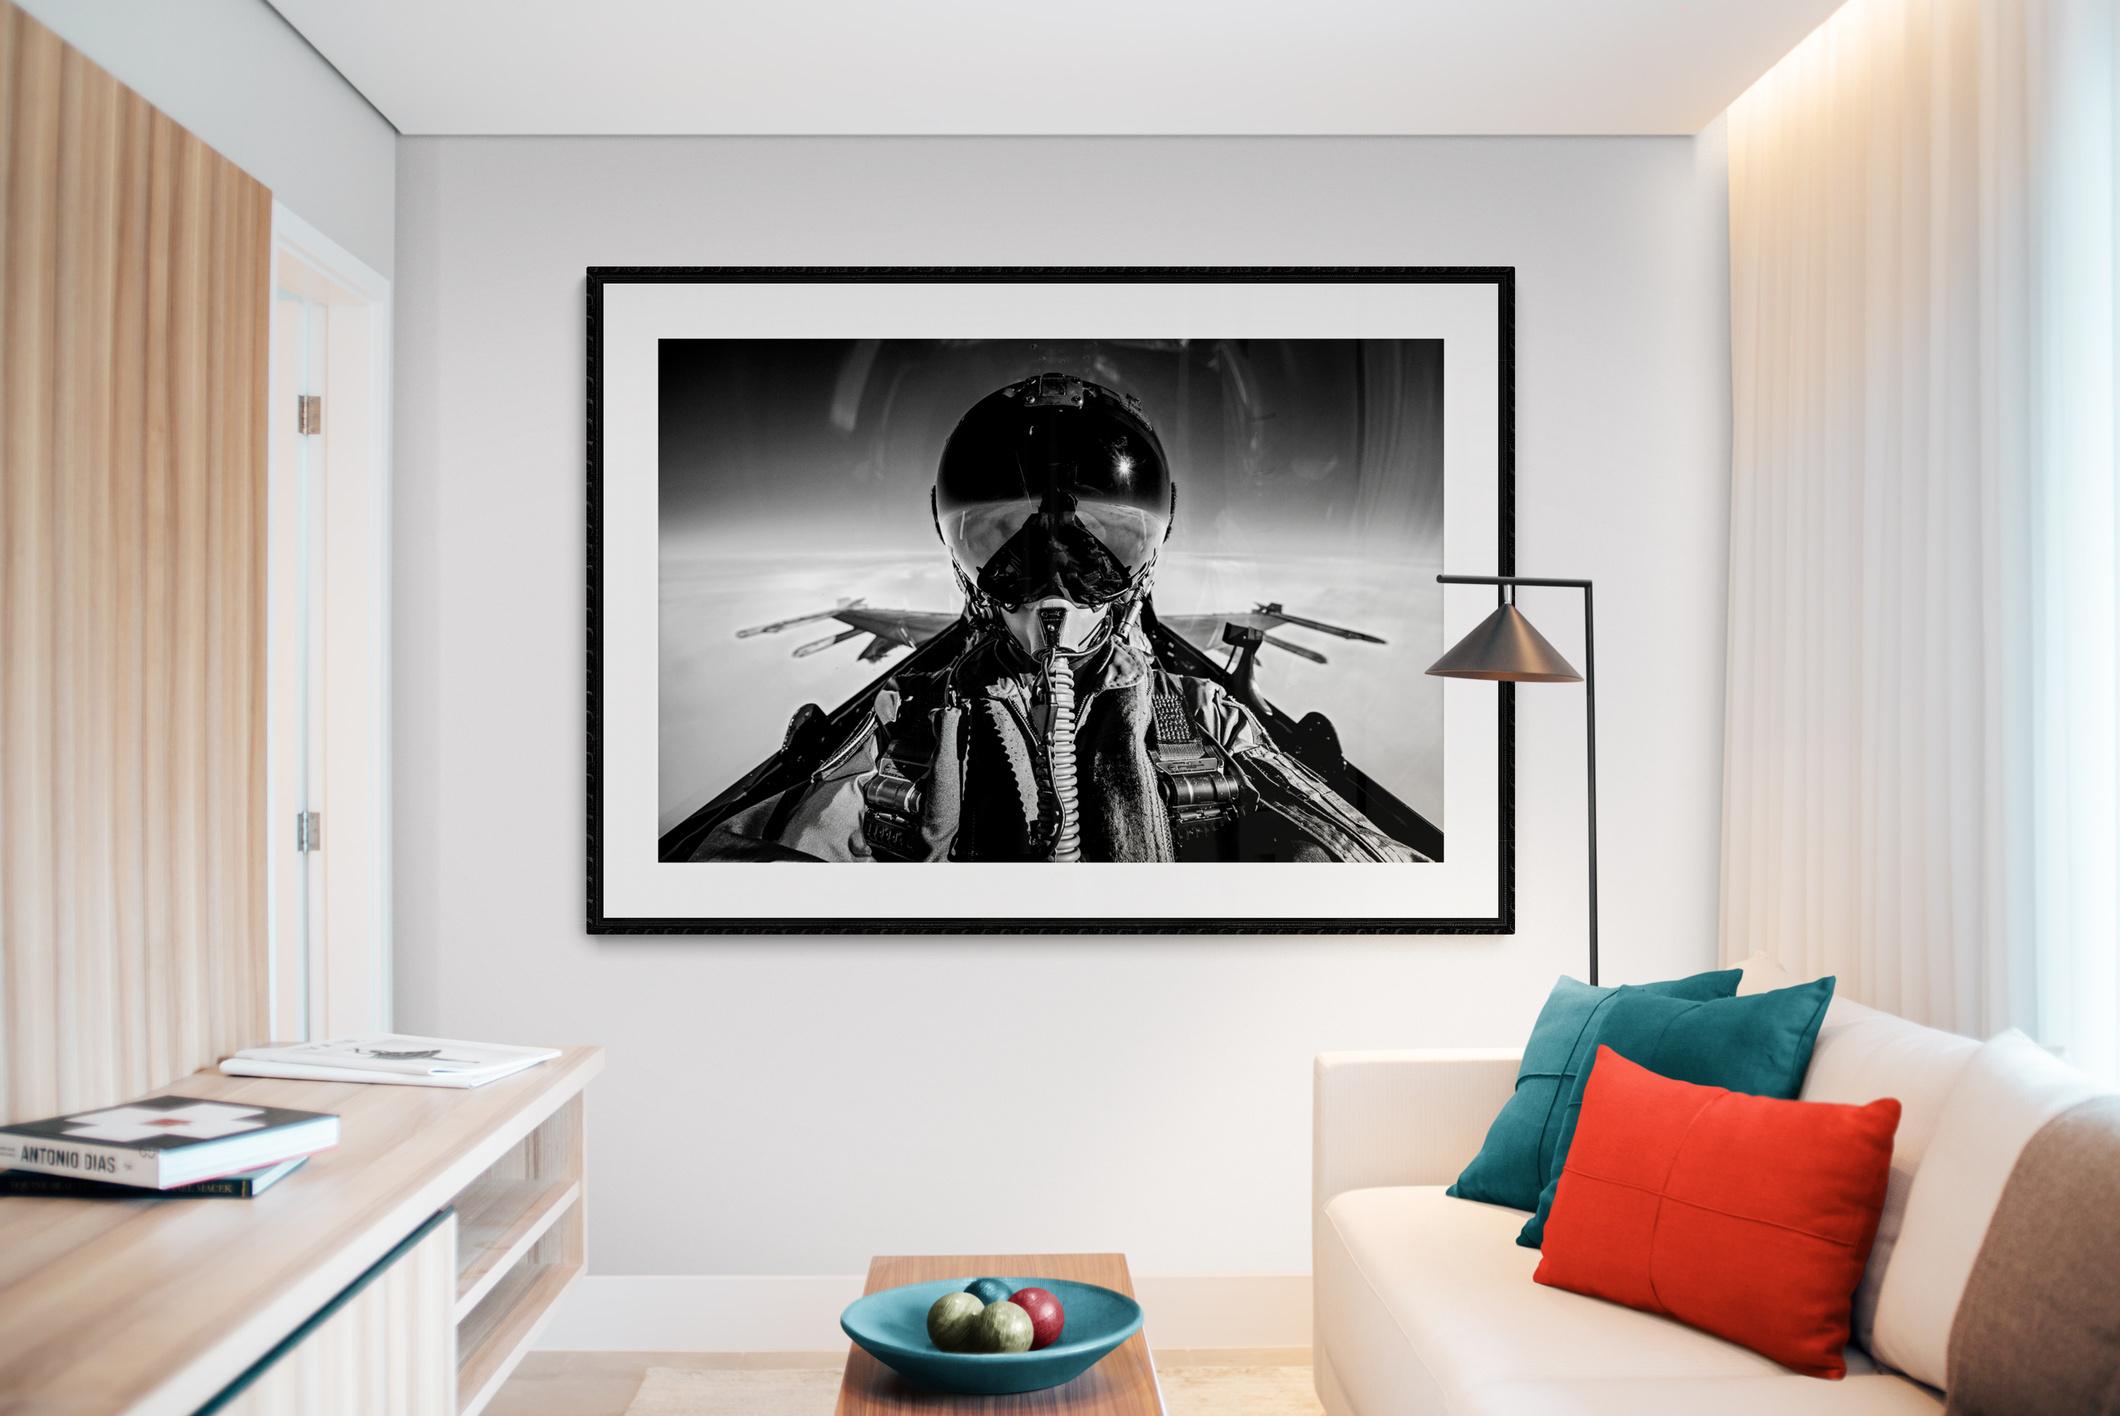 Special Framed Edition
VADOR THE SPACE SHOW is the first exhibition of photographs by Stefan Darte which is currently being held in Brussels in the coworking area named The Spaces (Gare Maritime - Tour & Taxis) from december 15th up to march